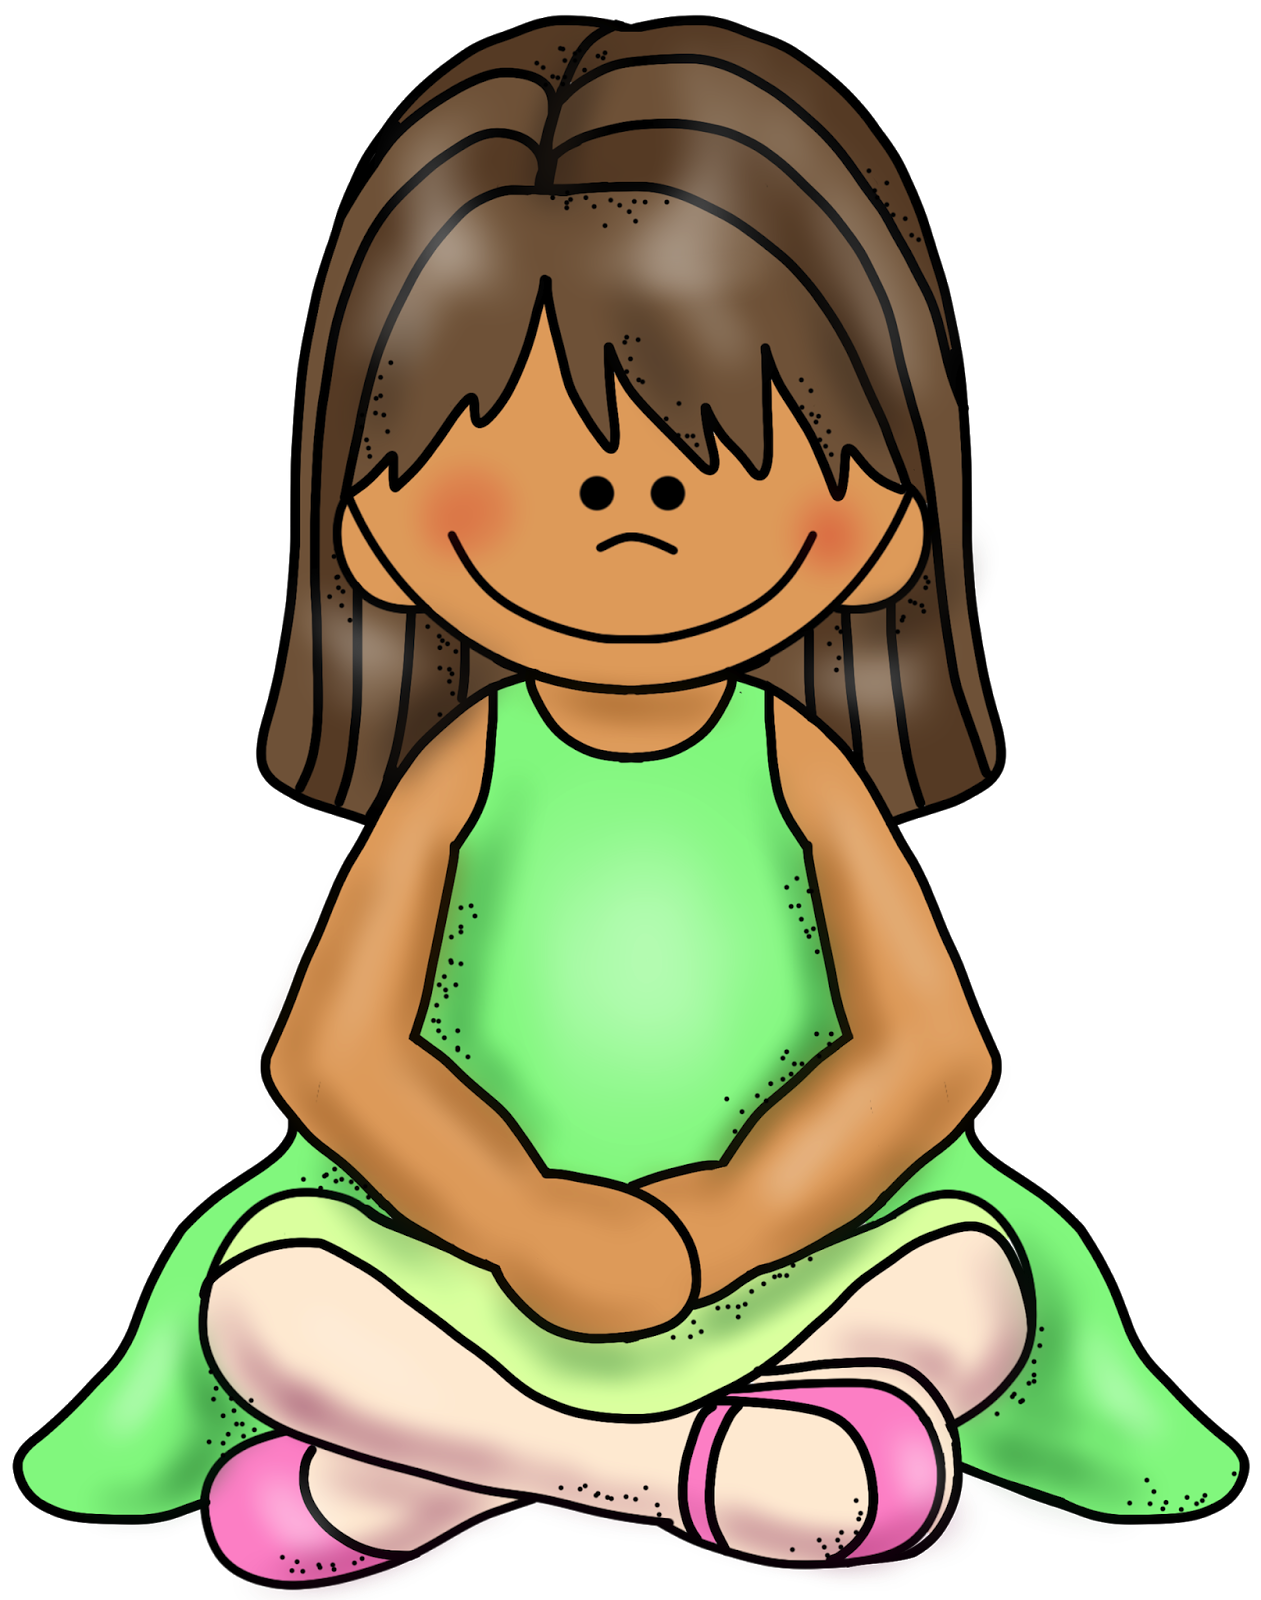 sit quietly clipart - photo #12